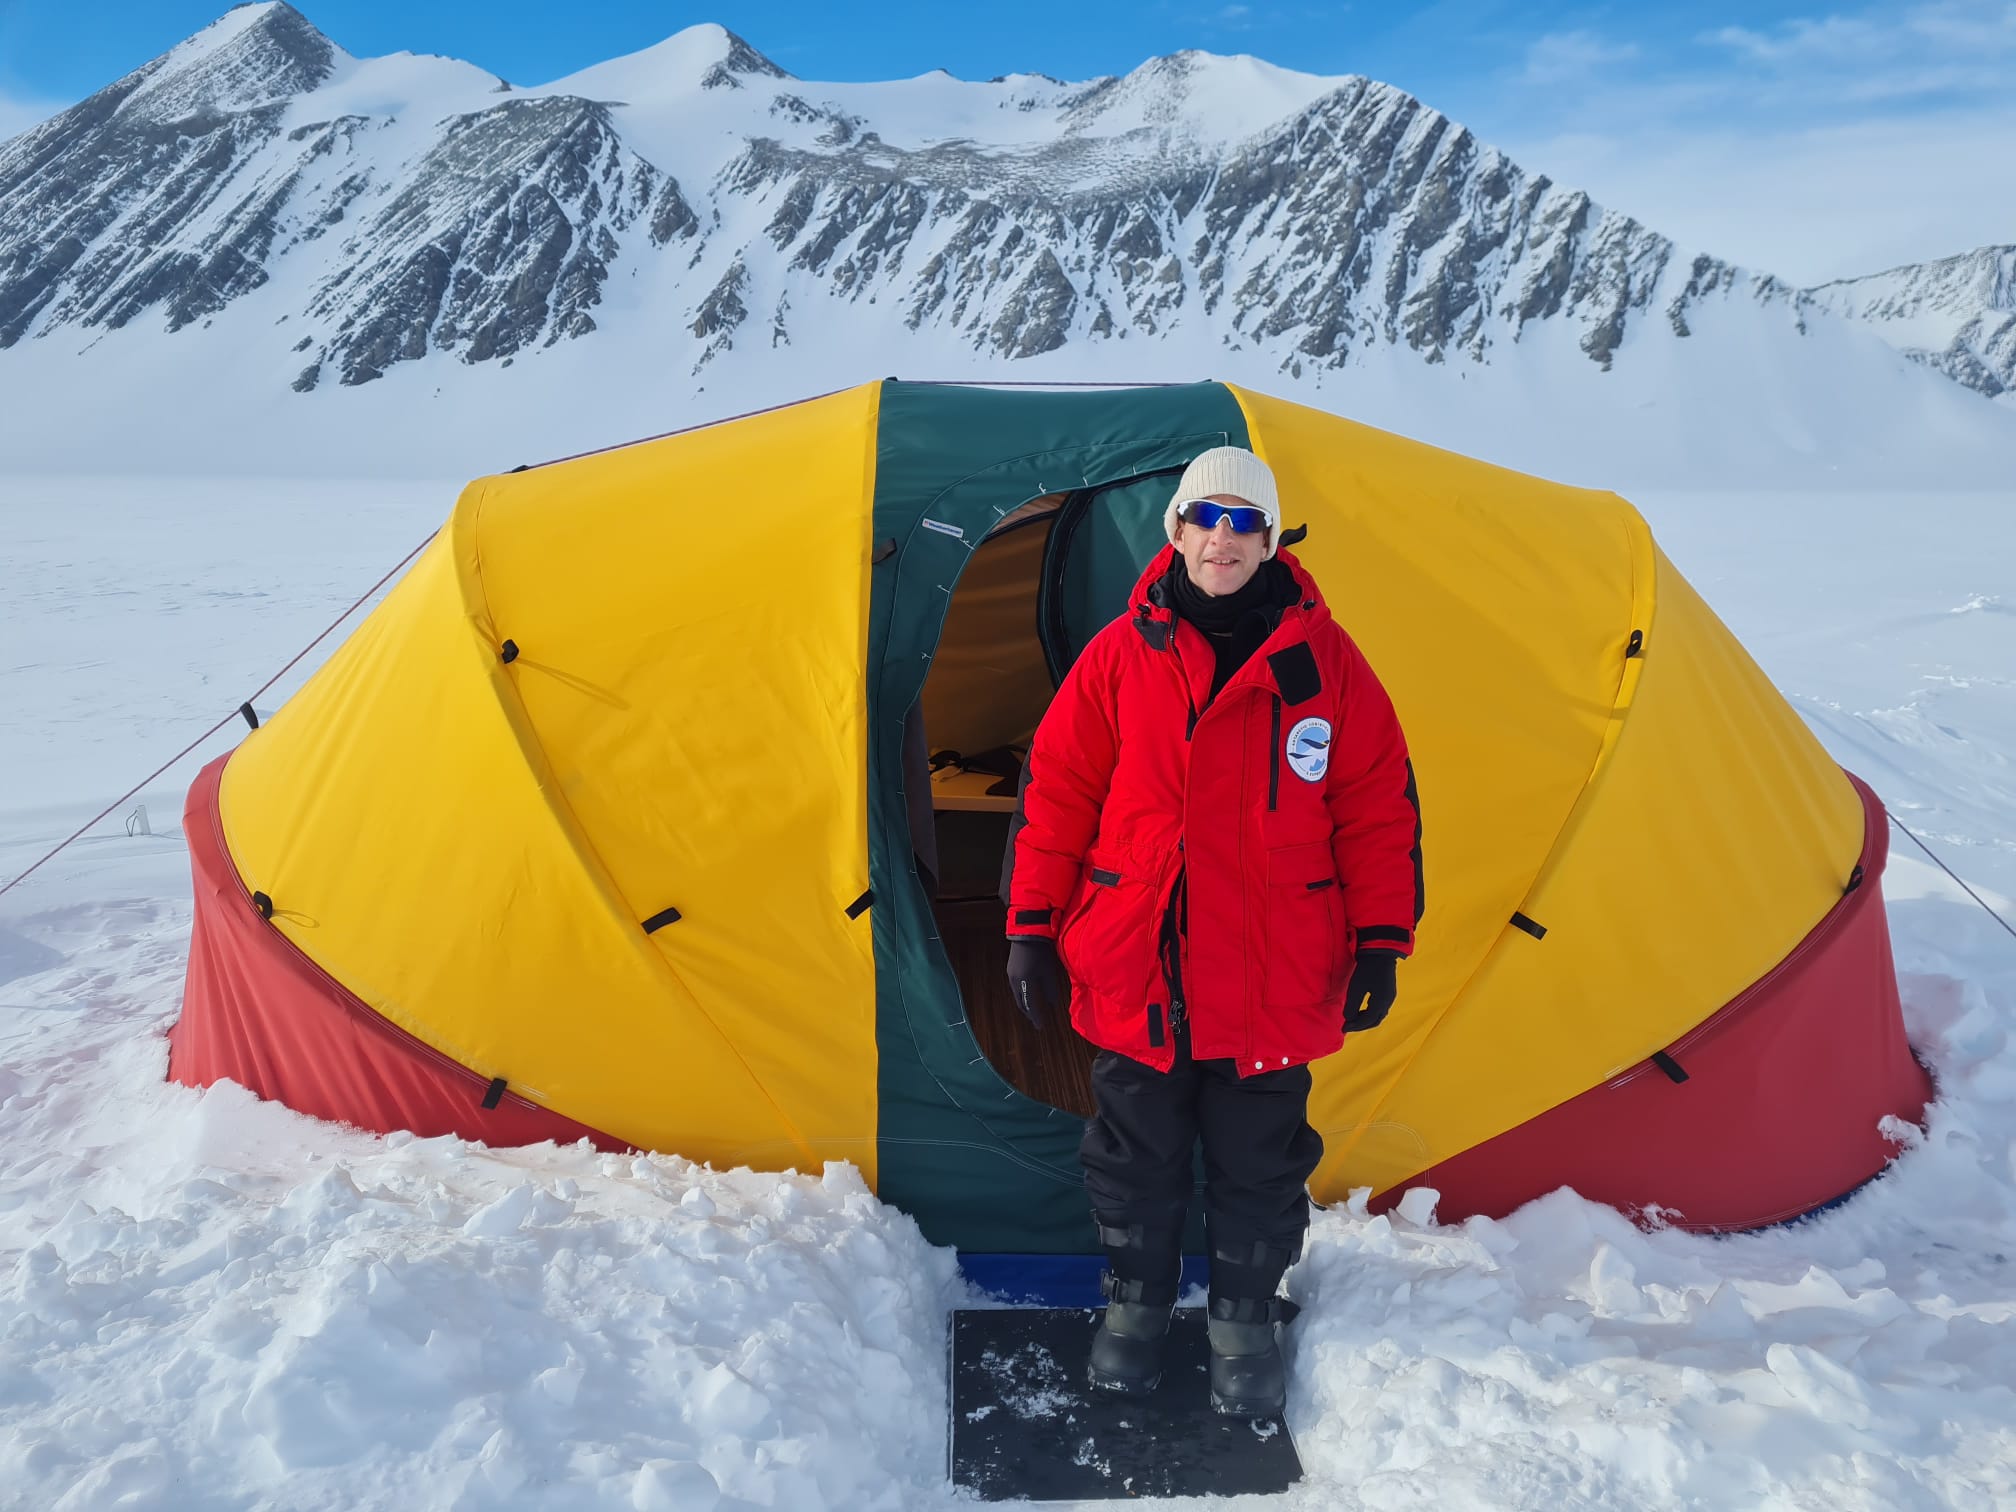 The personal tent where you sleep at night Photo: Nir Andelman